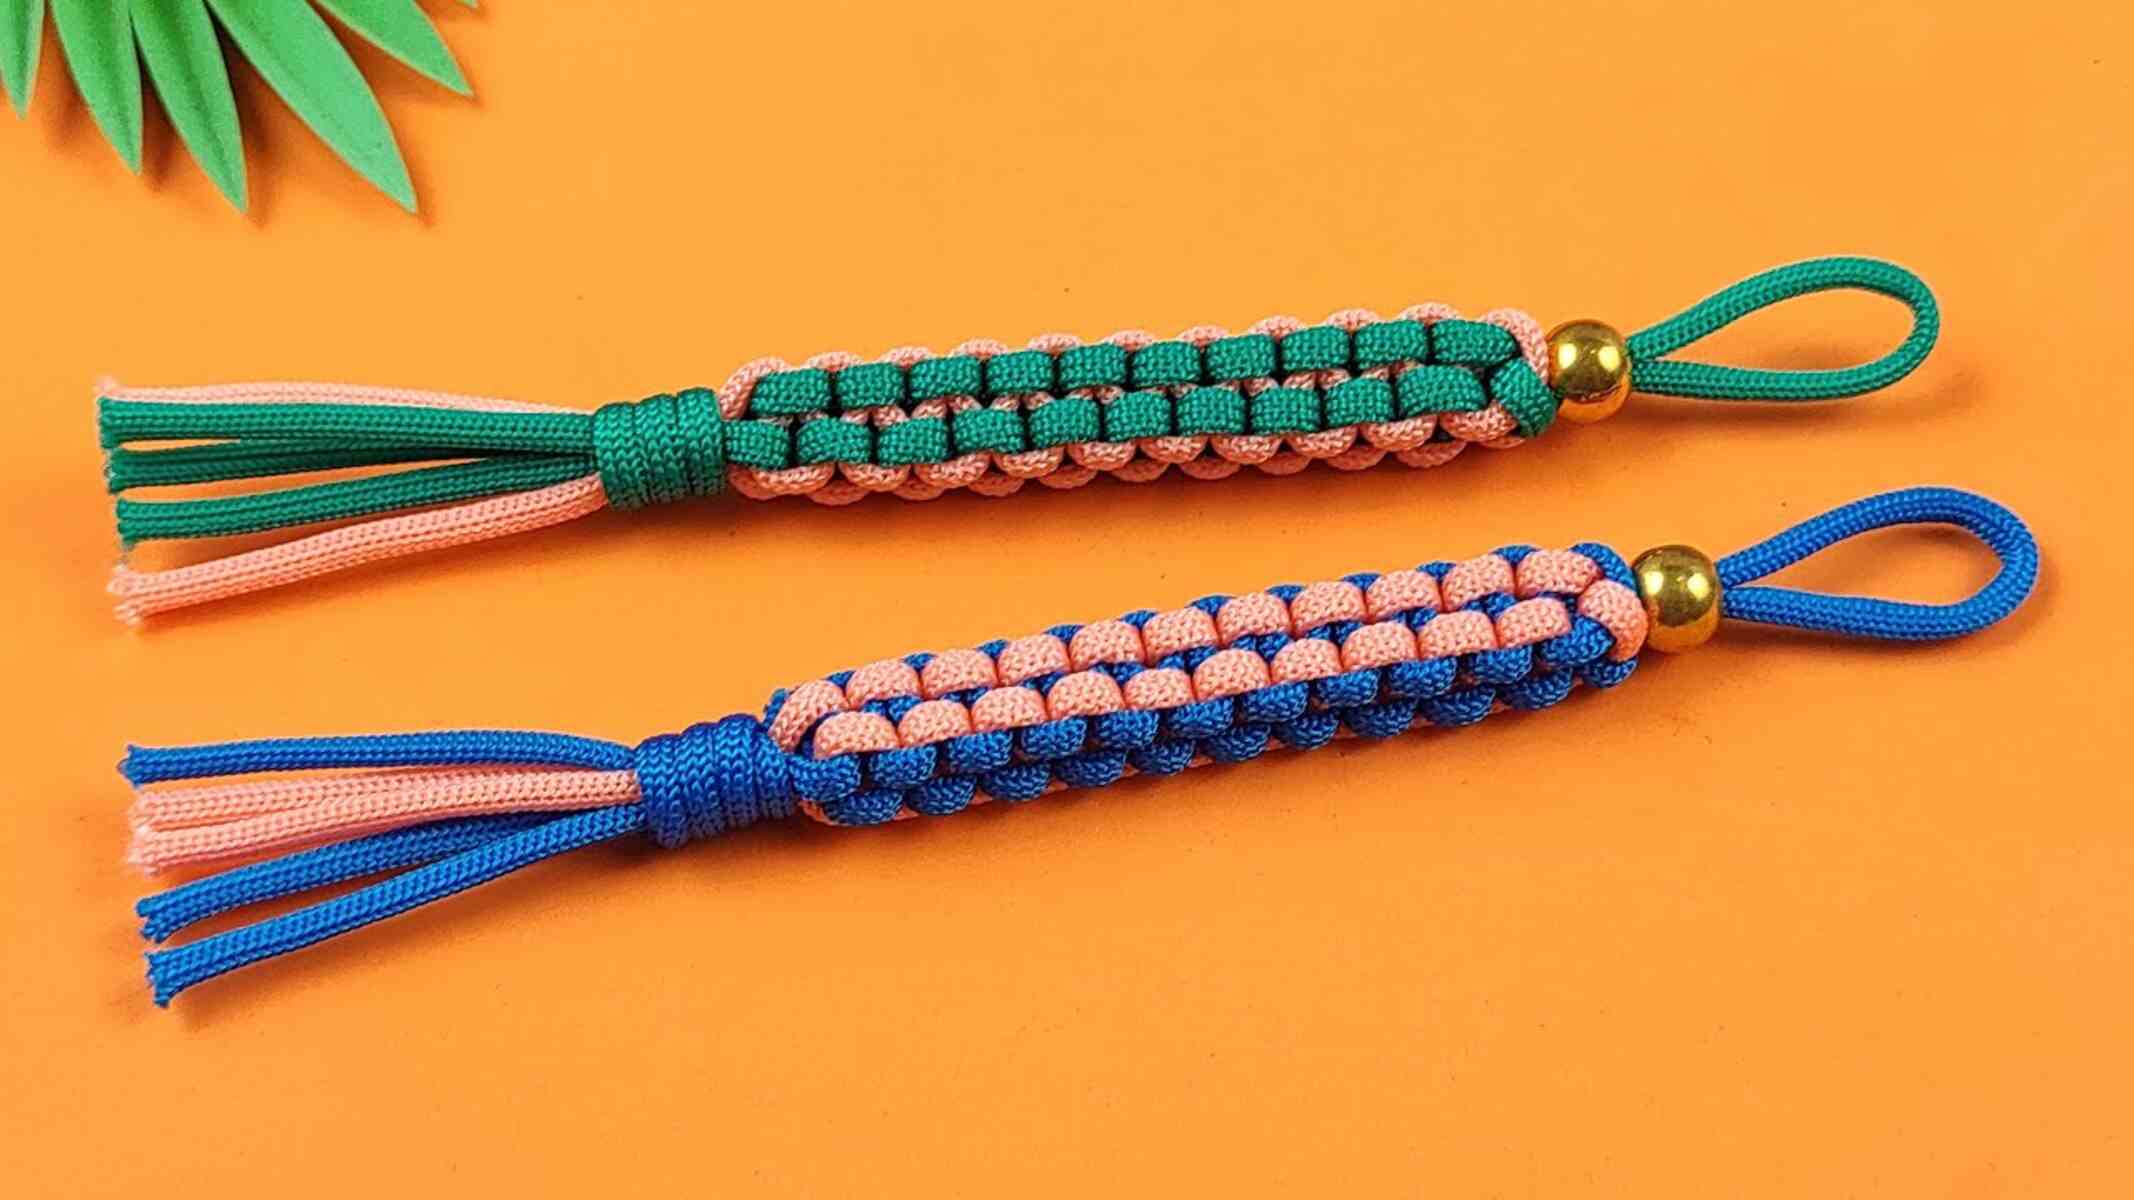 triplet-crafting-making-lanyards-with-three-strings